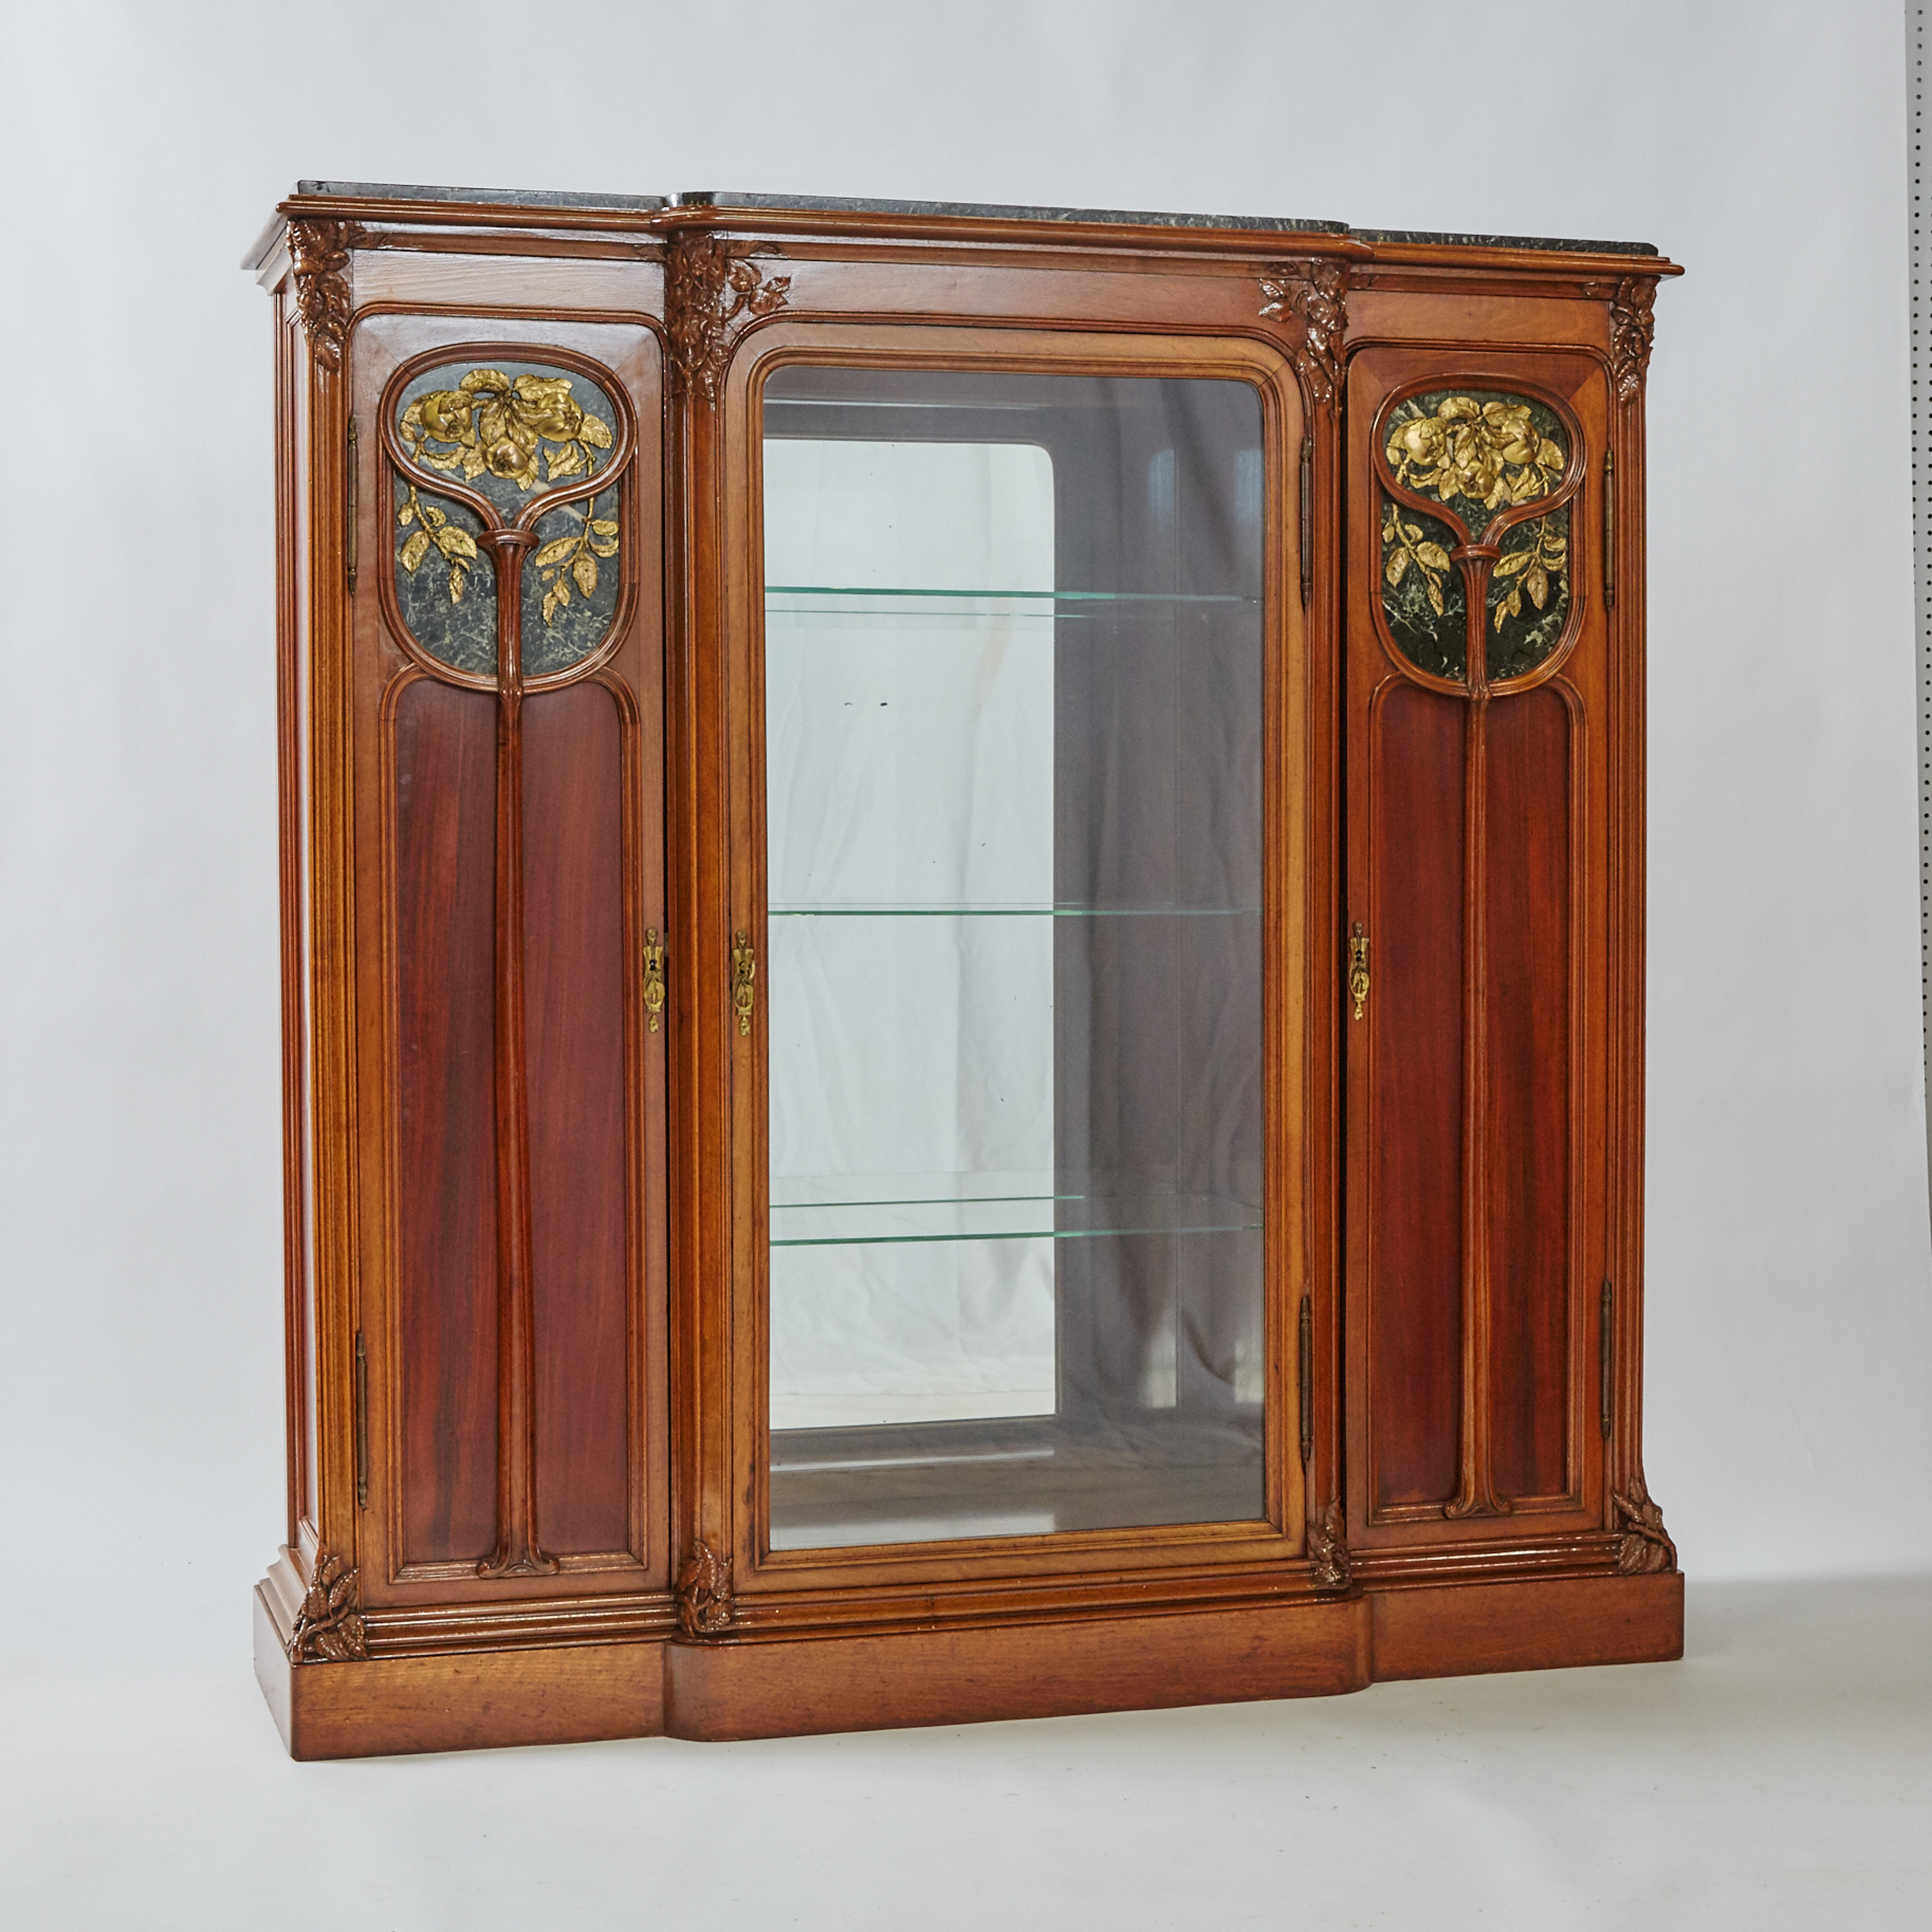 Louis Majorelle French Art Nouveau Ormolu Mounted Walnut and Rosewood Vitrine Cabinet, 19th/early 20th century